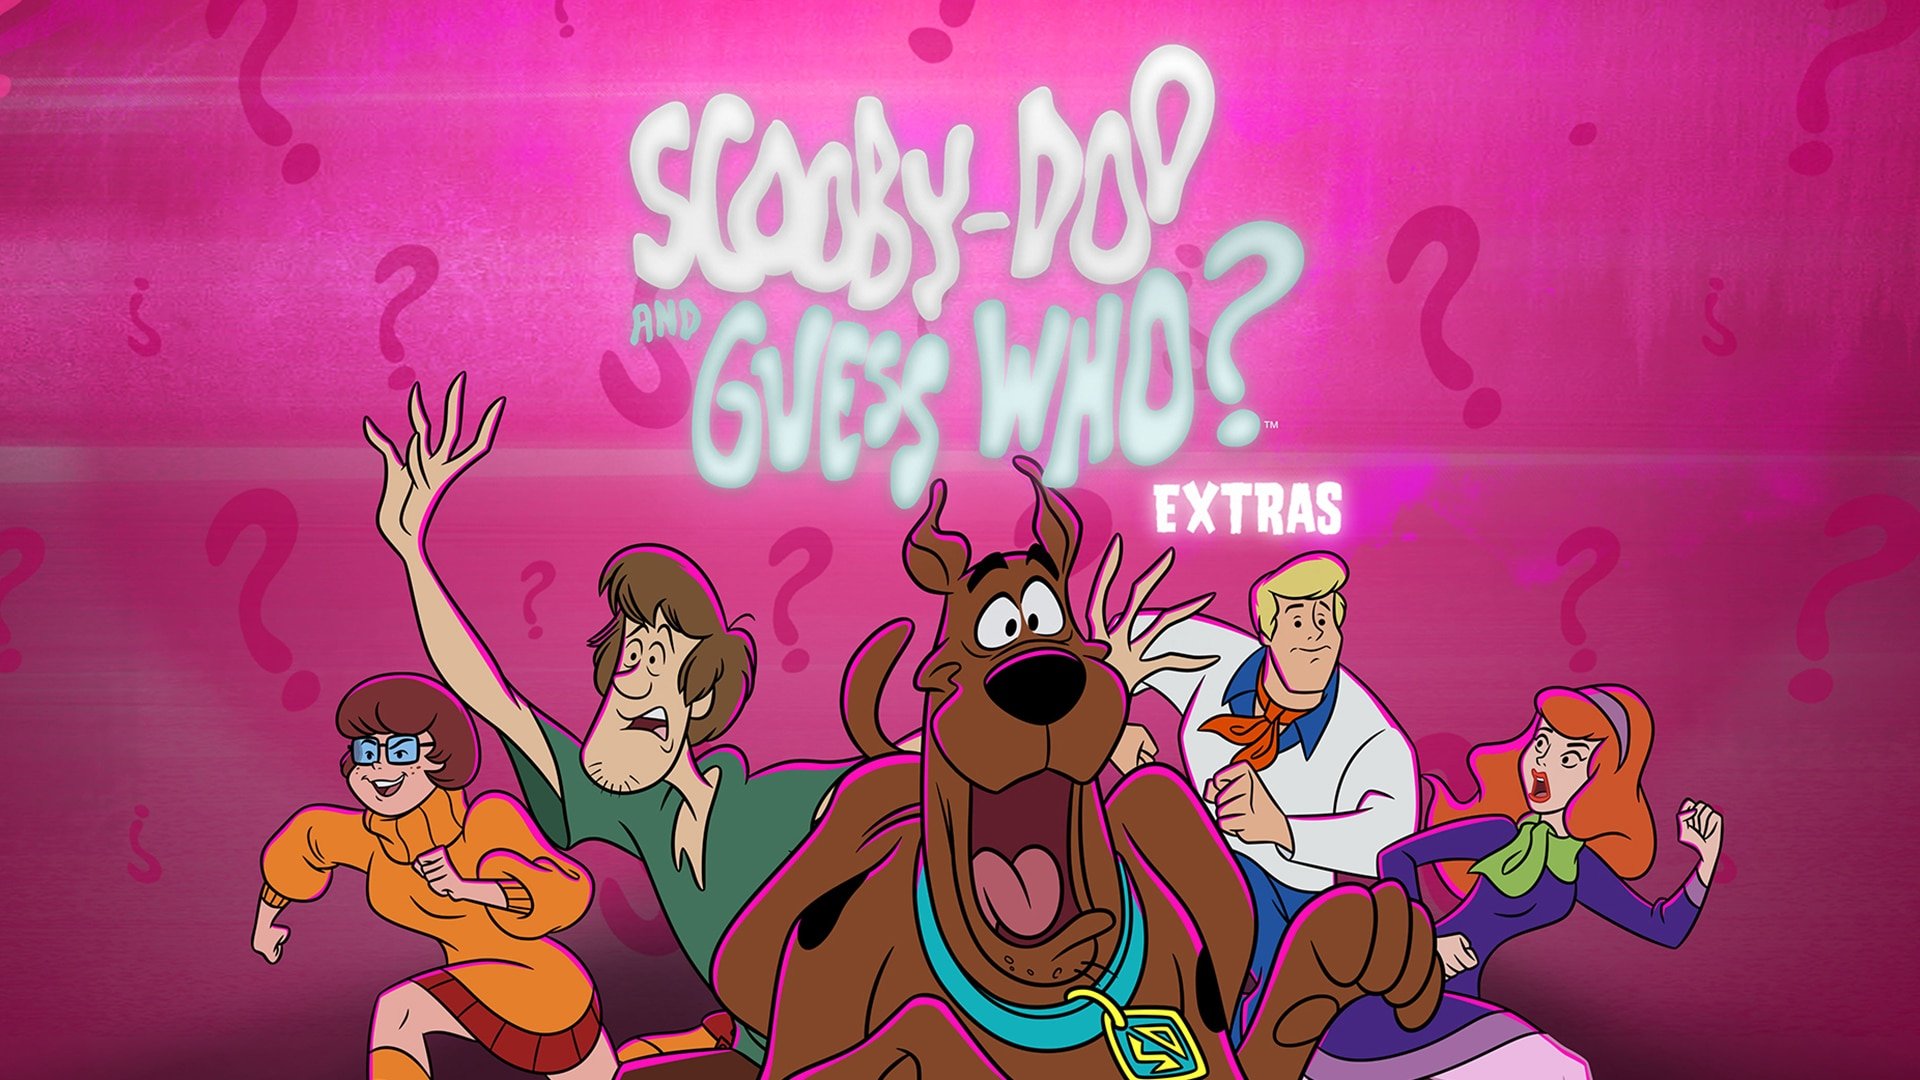 Watch Scooby-Doo and Guess Who?: Extras Online - Stream Full Episodes